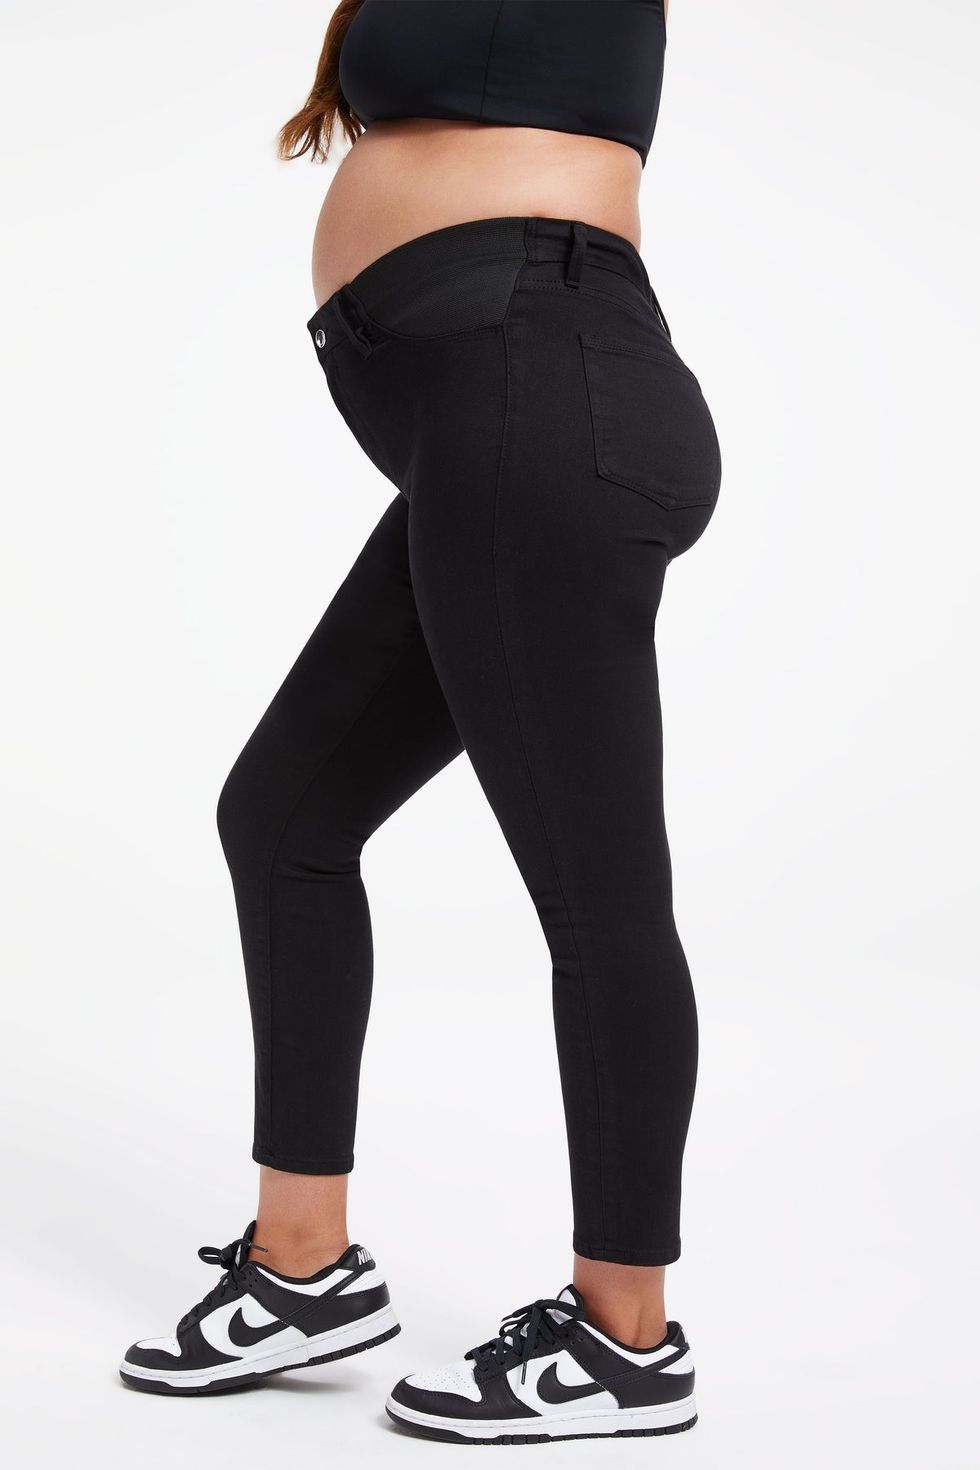 My Favorite Maternity Leggings (And Every Day Leggings Too!) — Abigail  Amira Home